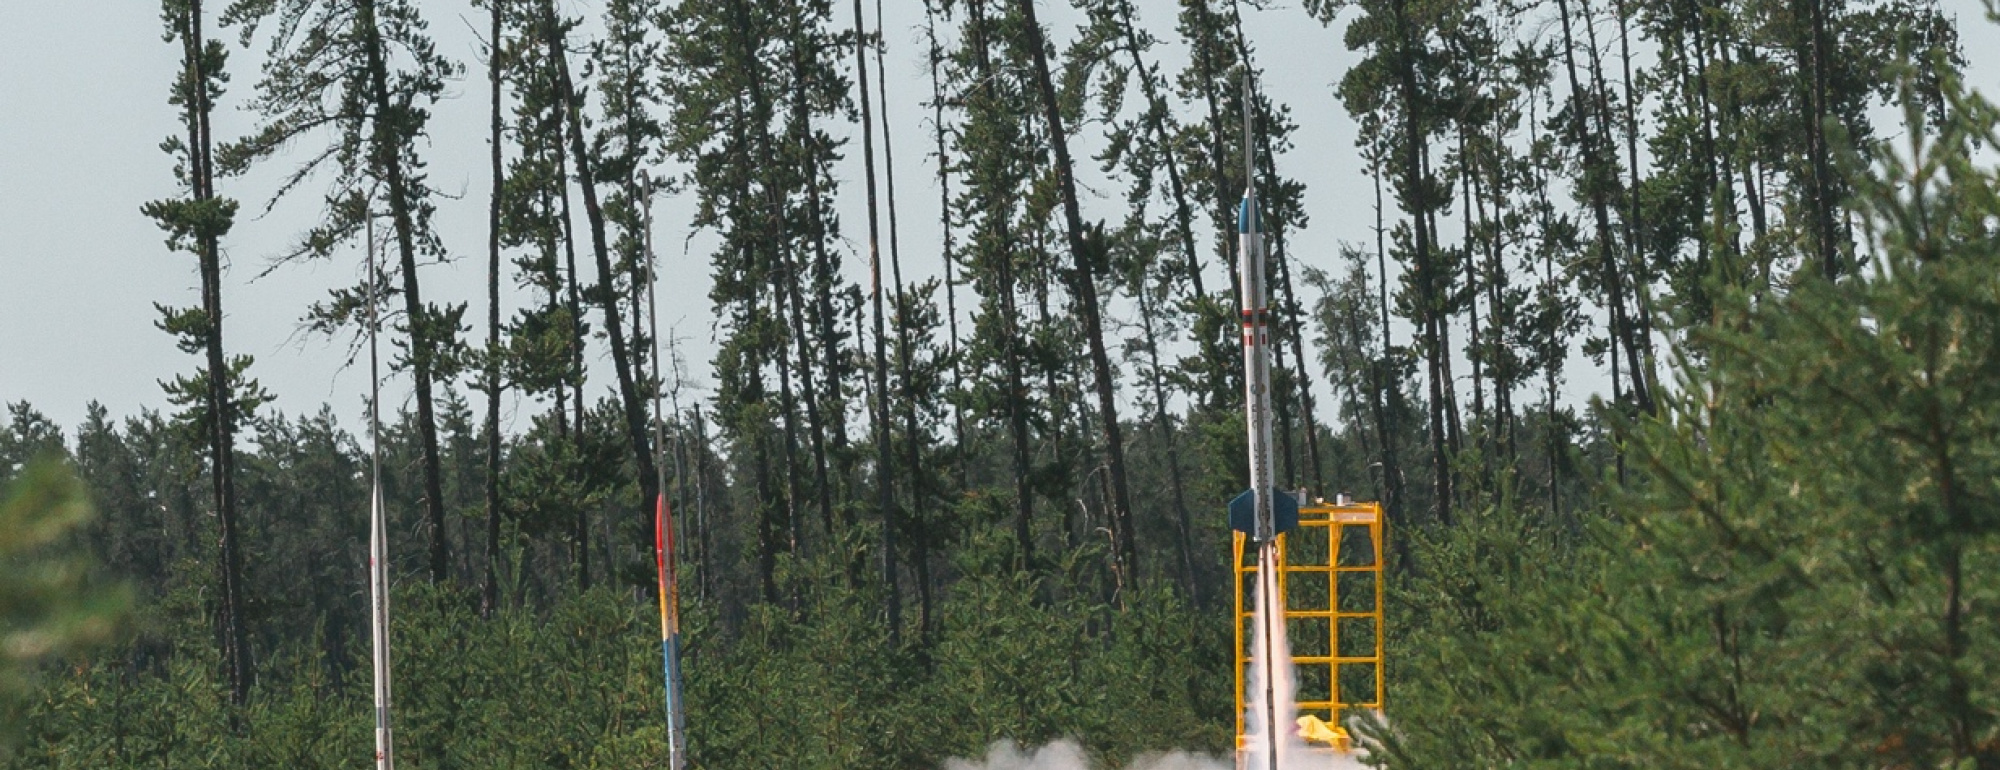 small rocket launch surrounded by trees